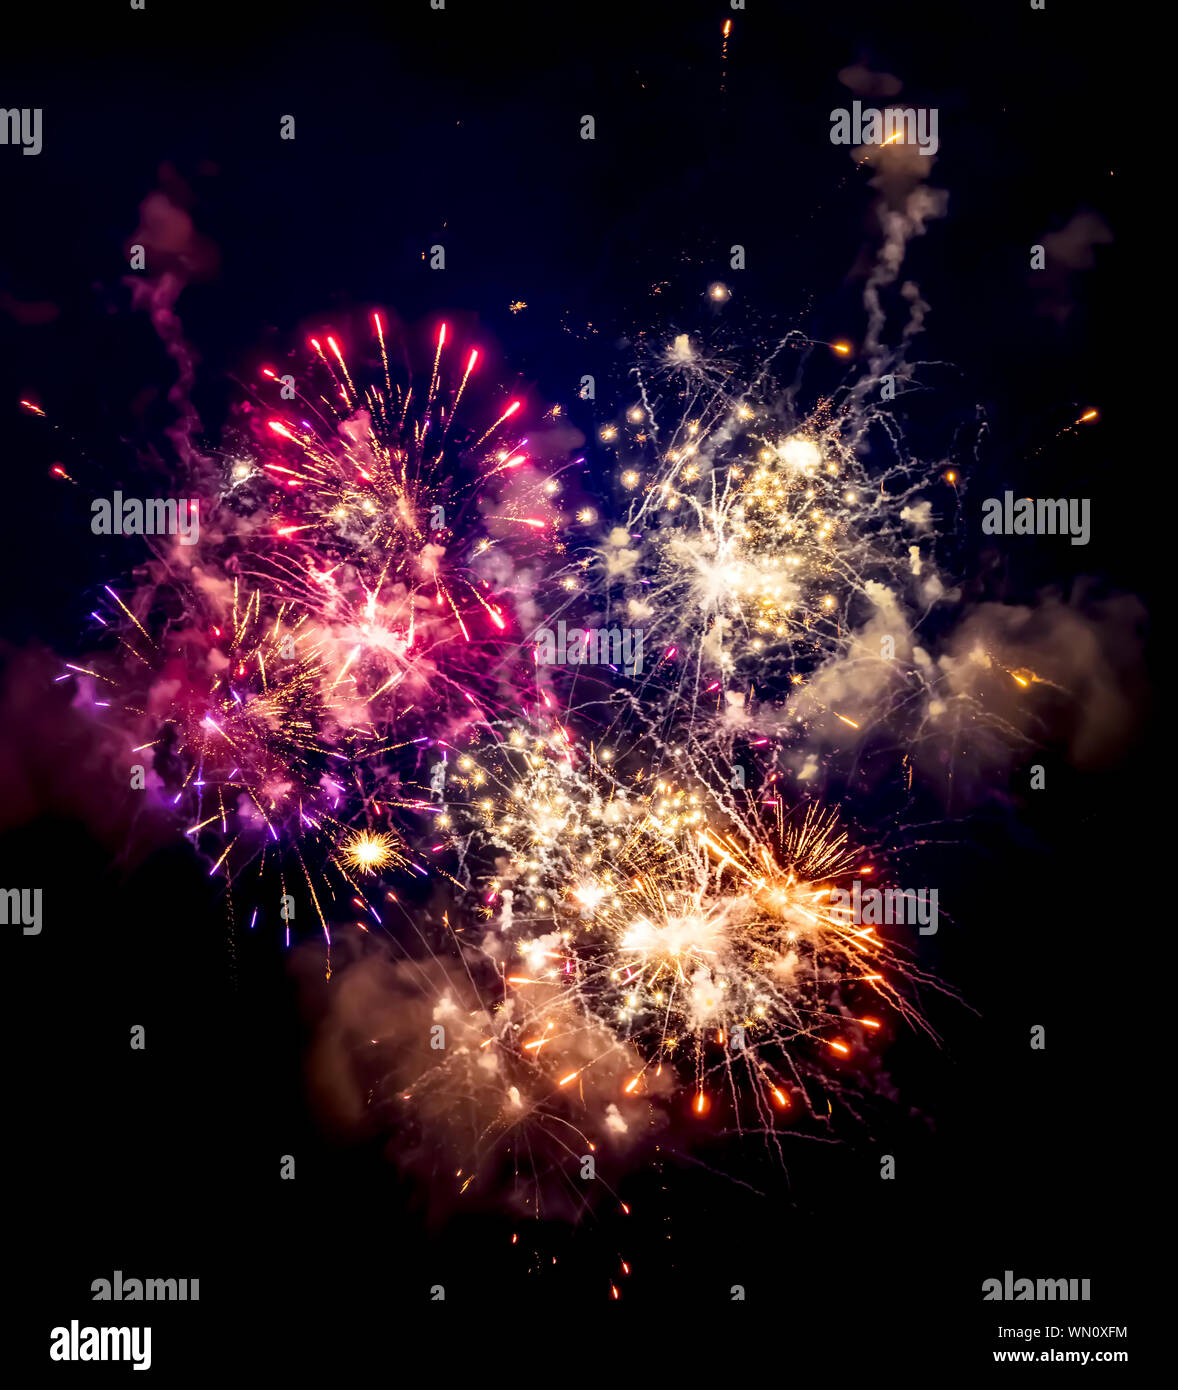 Low Angle View Of Colorful Fireworks Display Against Sky At Night Stock Photo